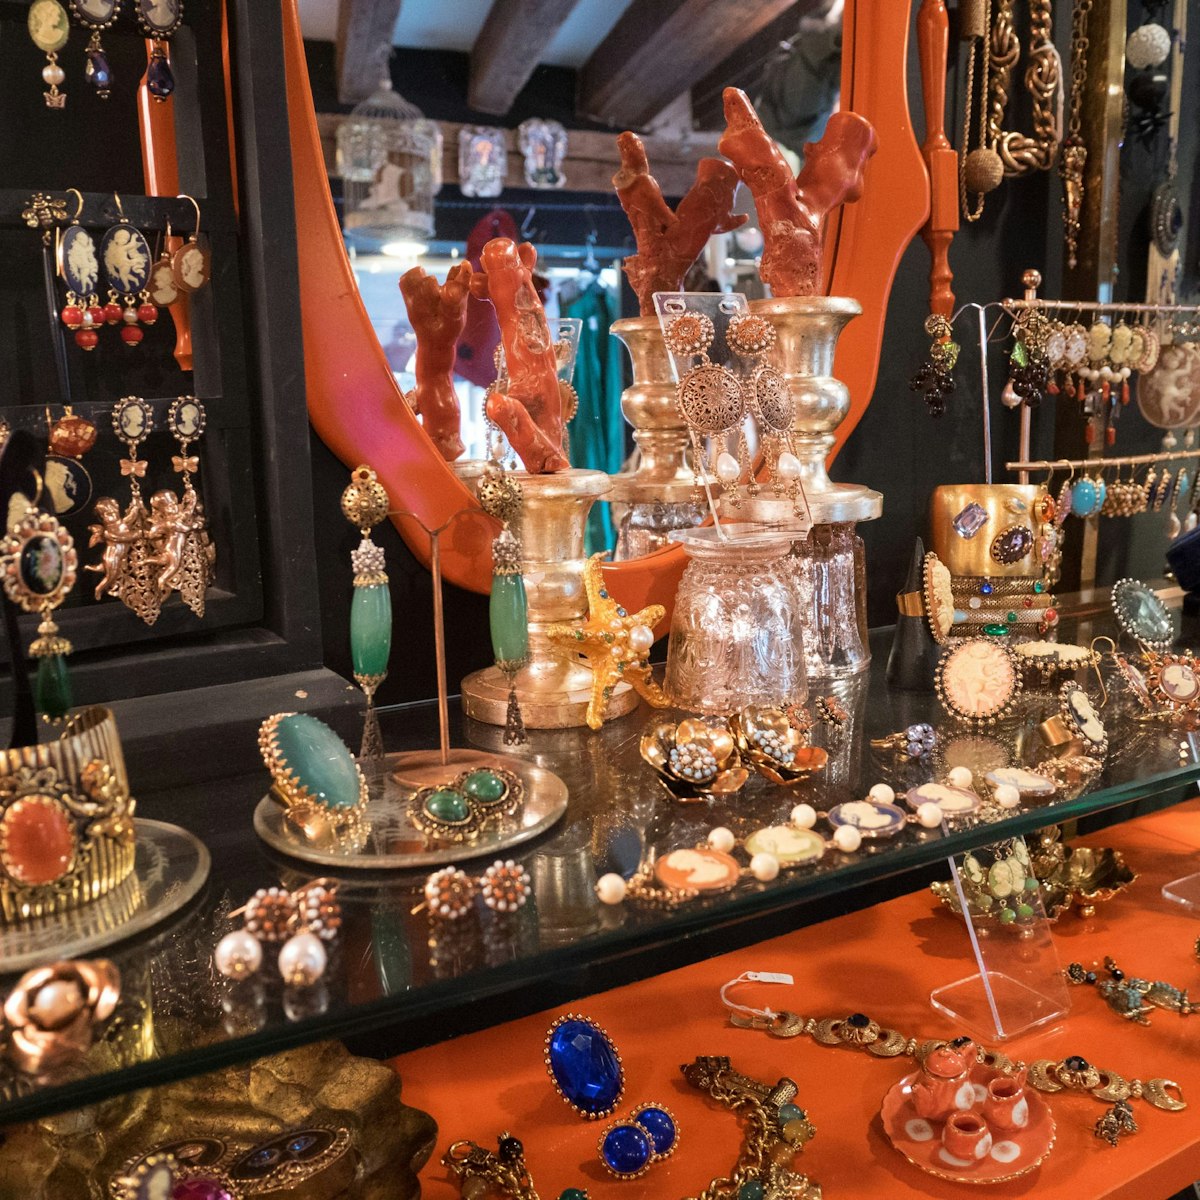 Hand-made jewellery on display at La Maison de La Sireneuse fashion and accessories store.